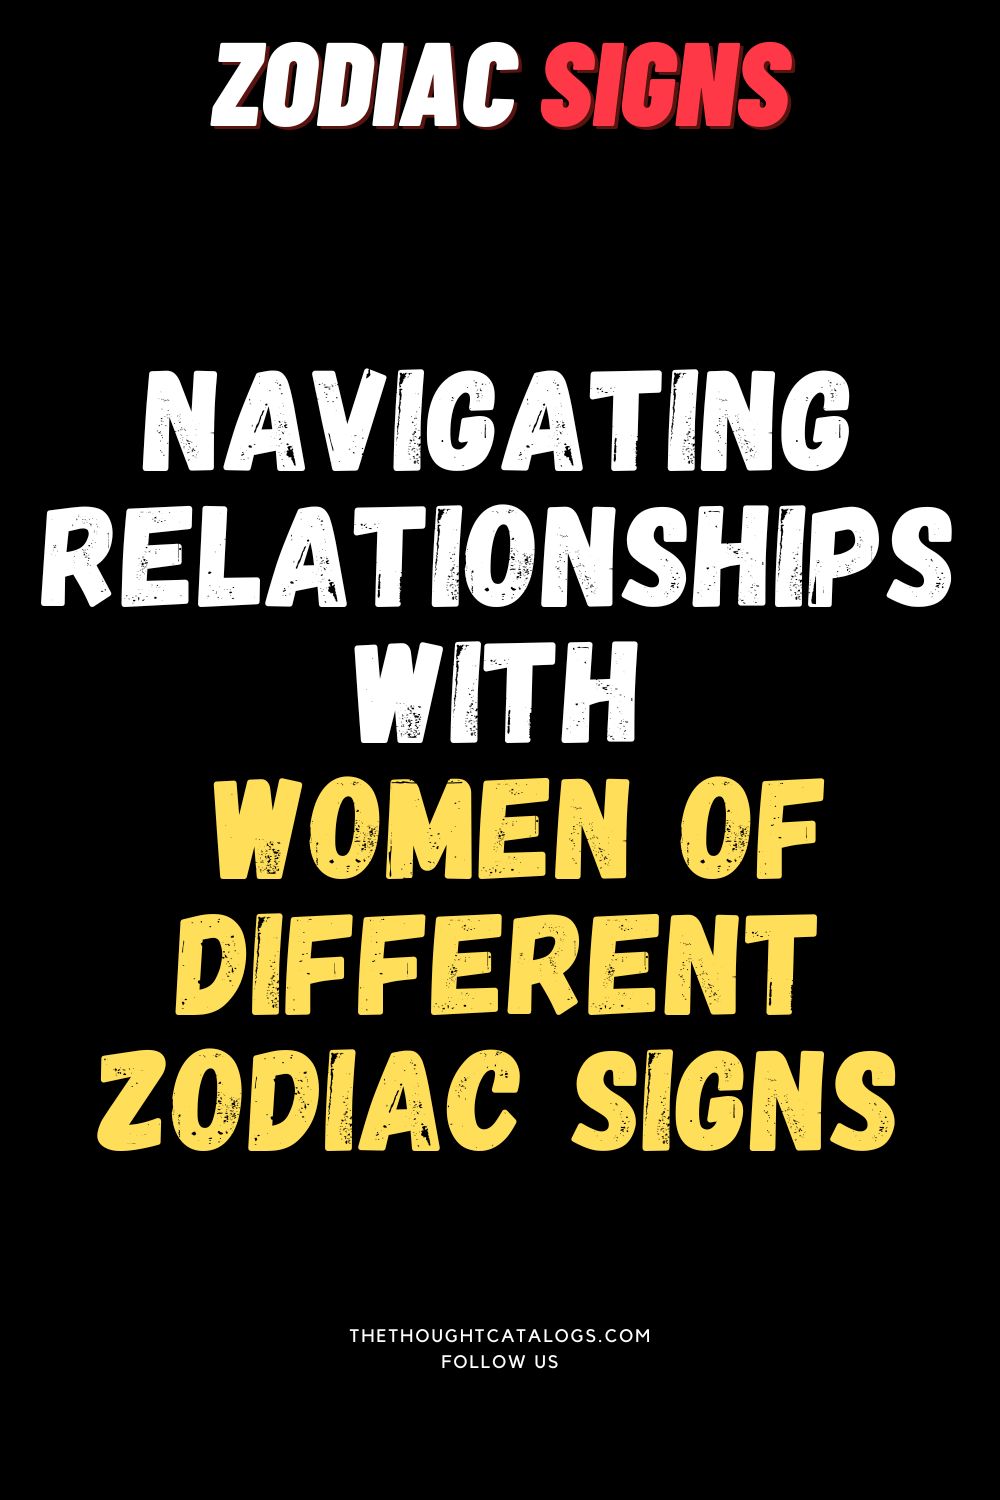 Navigating Relationships with Women of Different Zodiac Signs